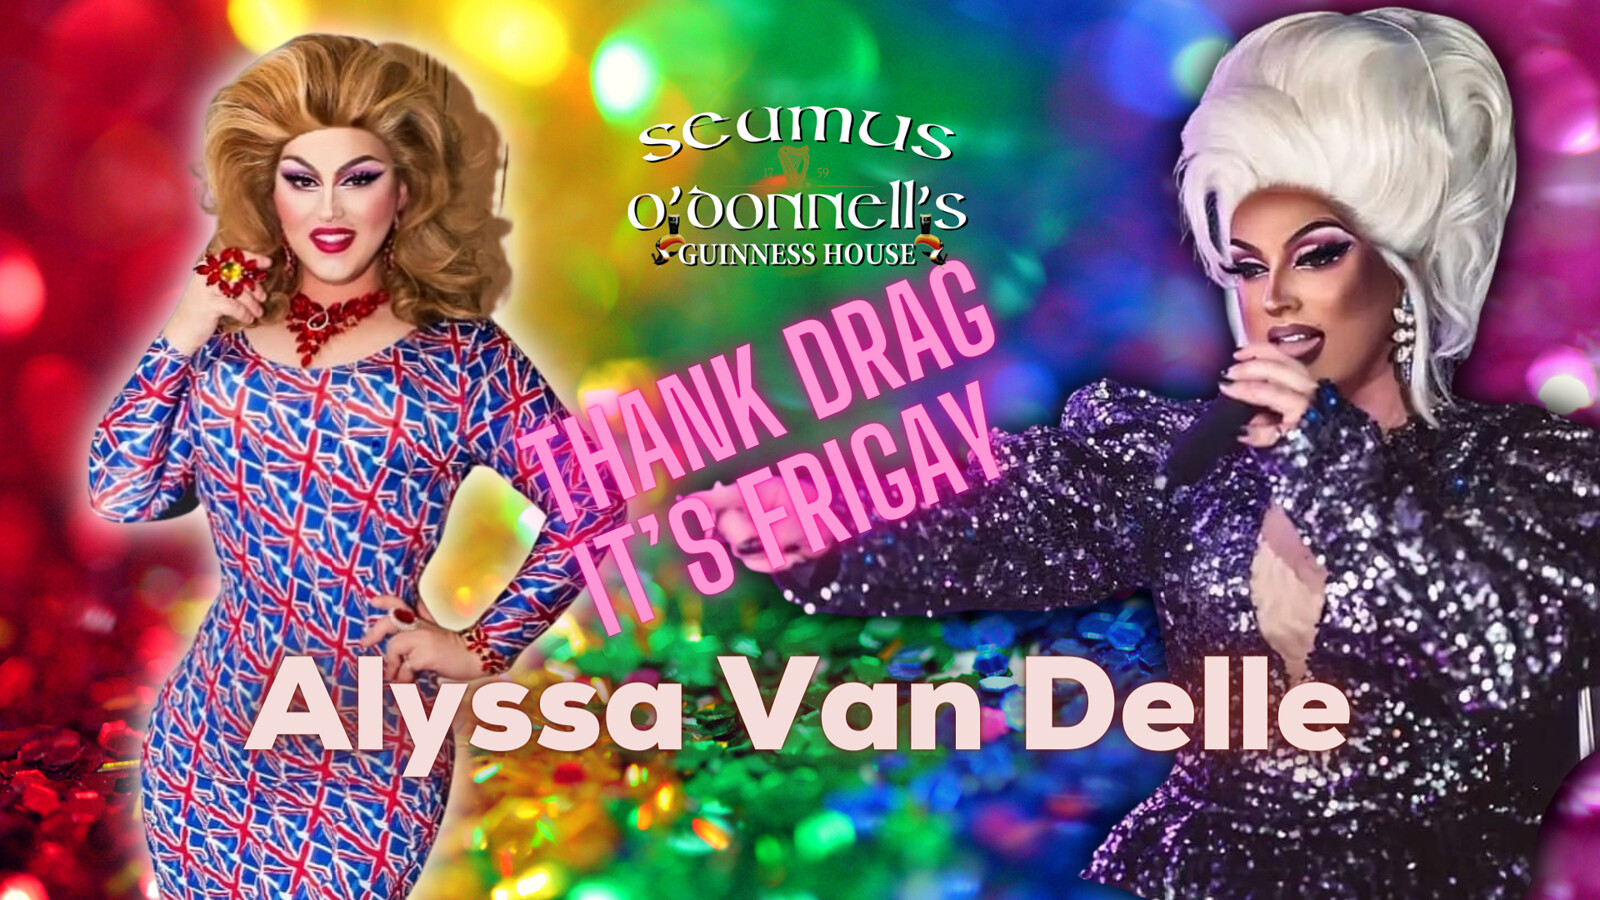 Thank Drag it's FriGay with Alyssa Van Delle at Seamus O'Donnell's